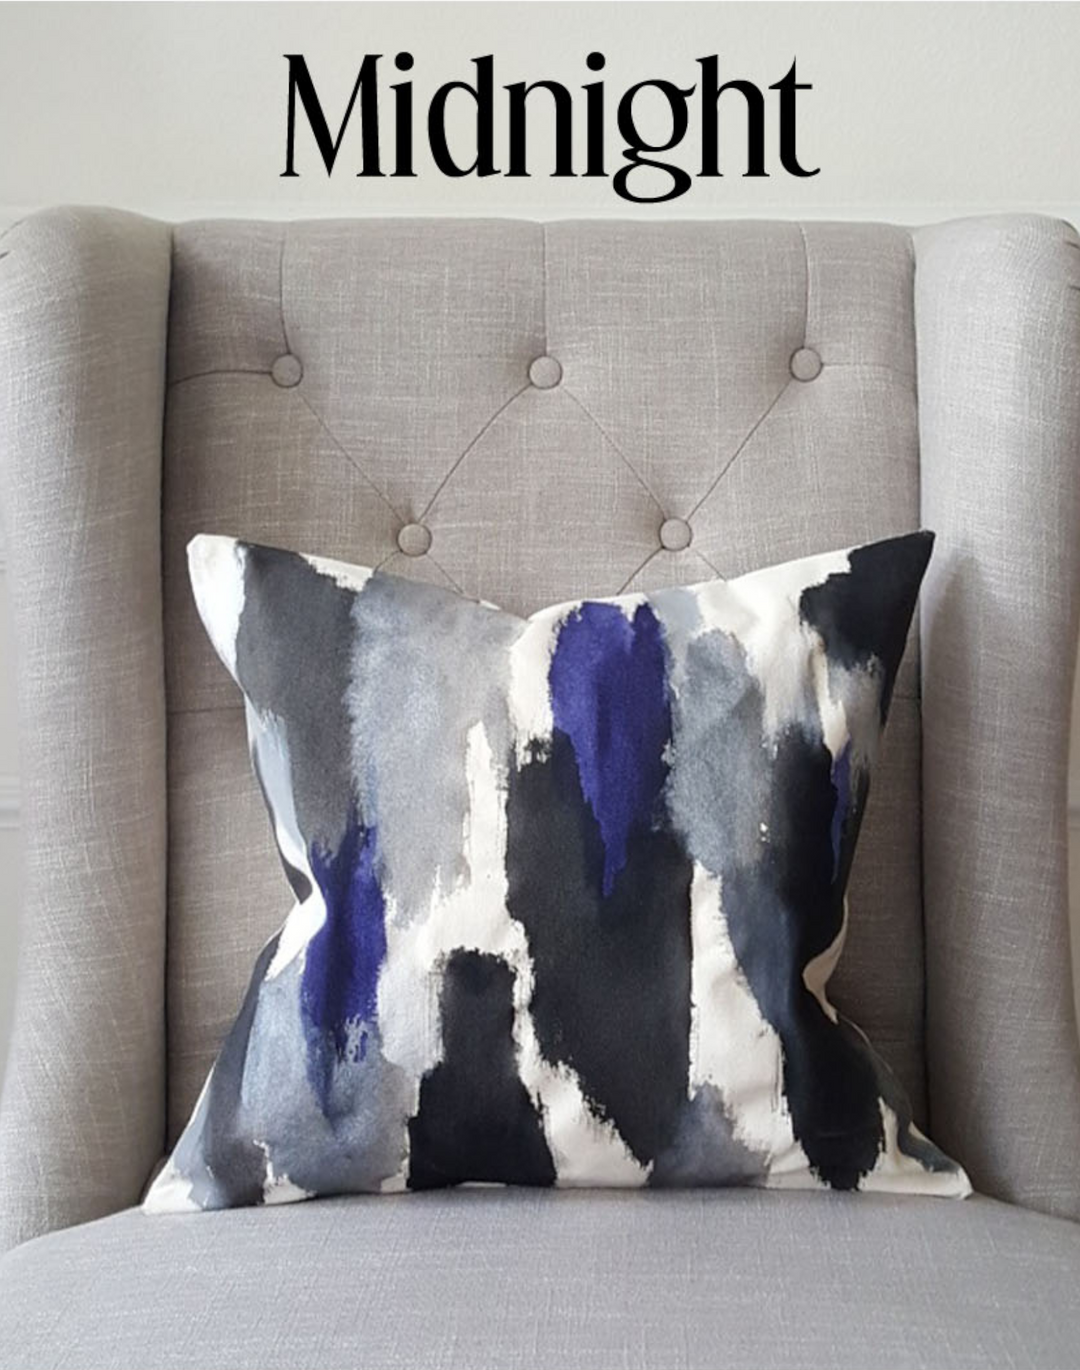 Julie Kay Hand Painted Watercolor Pillow Cover, Midnight